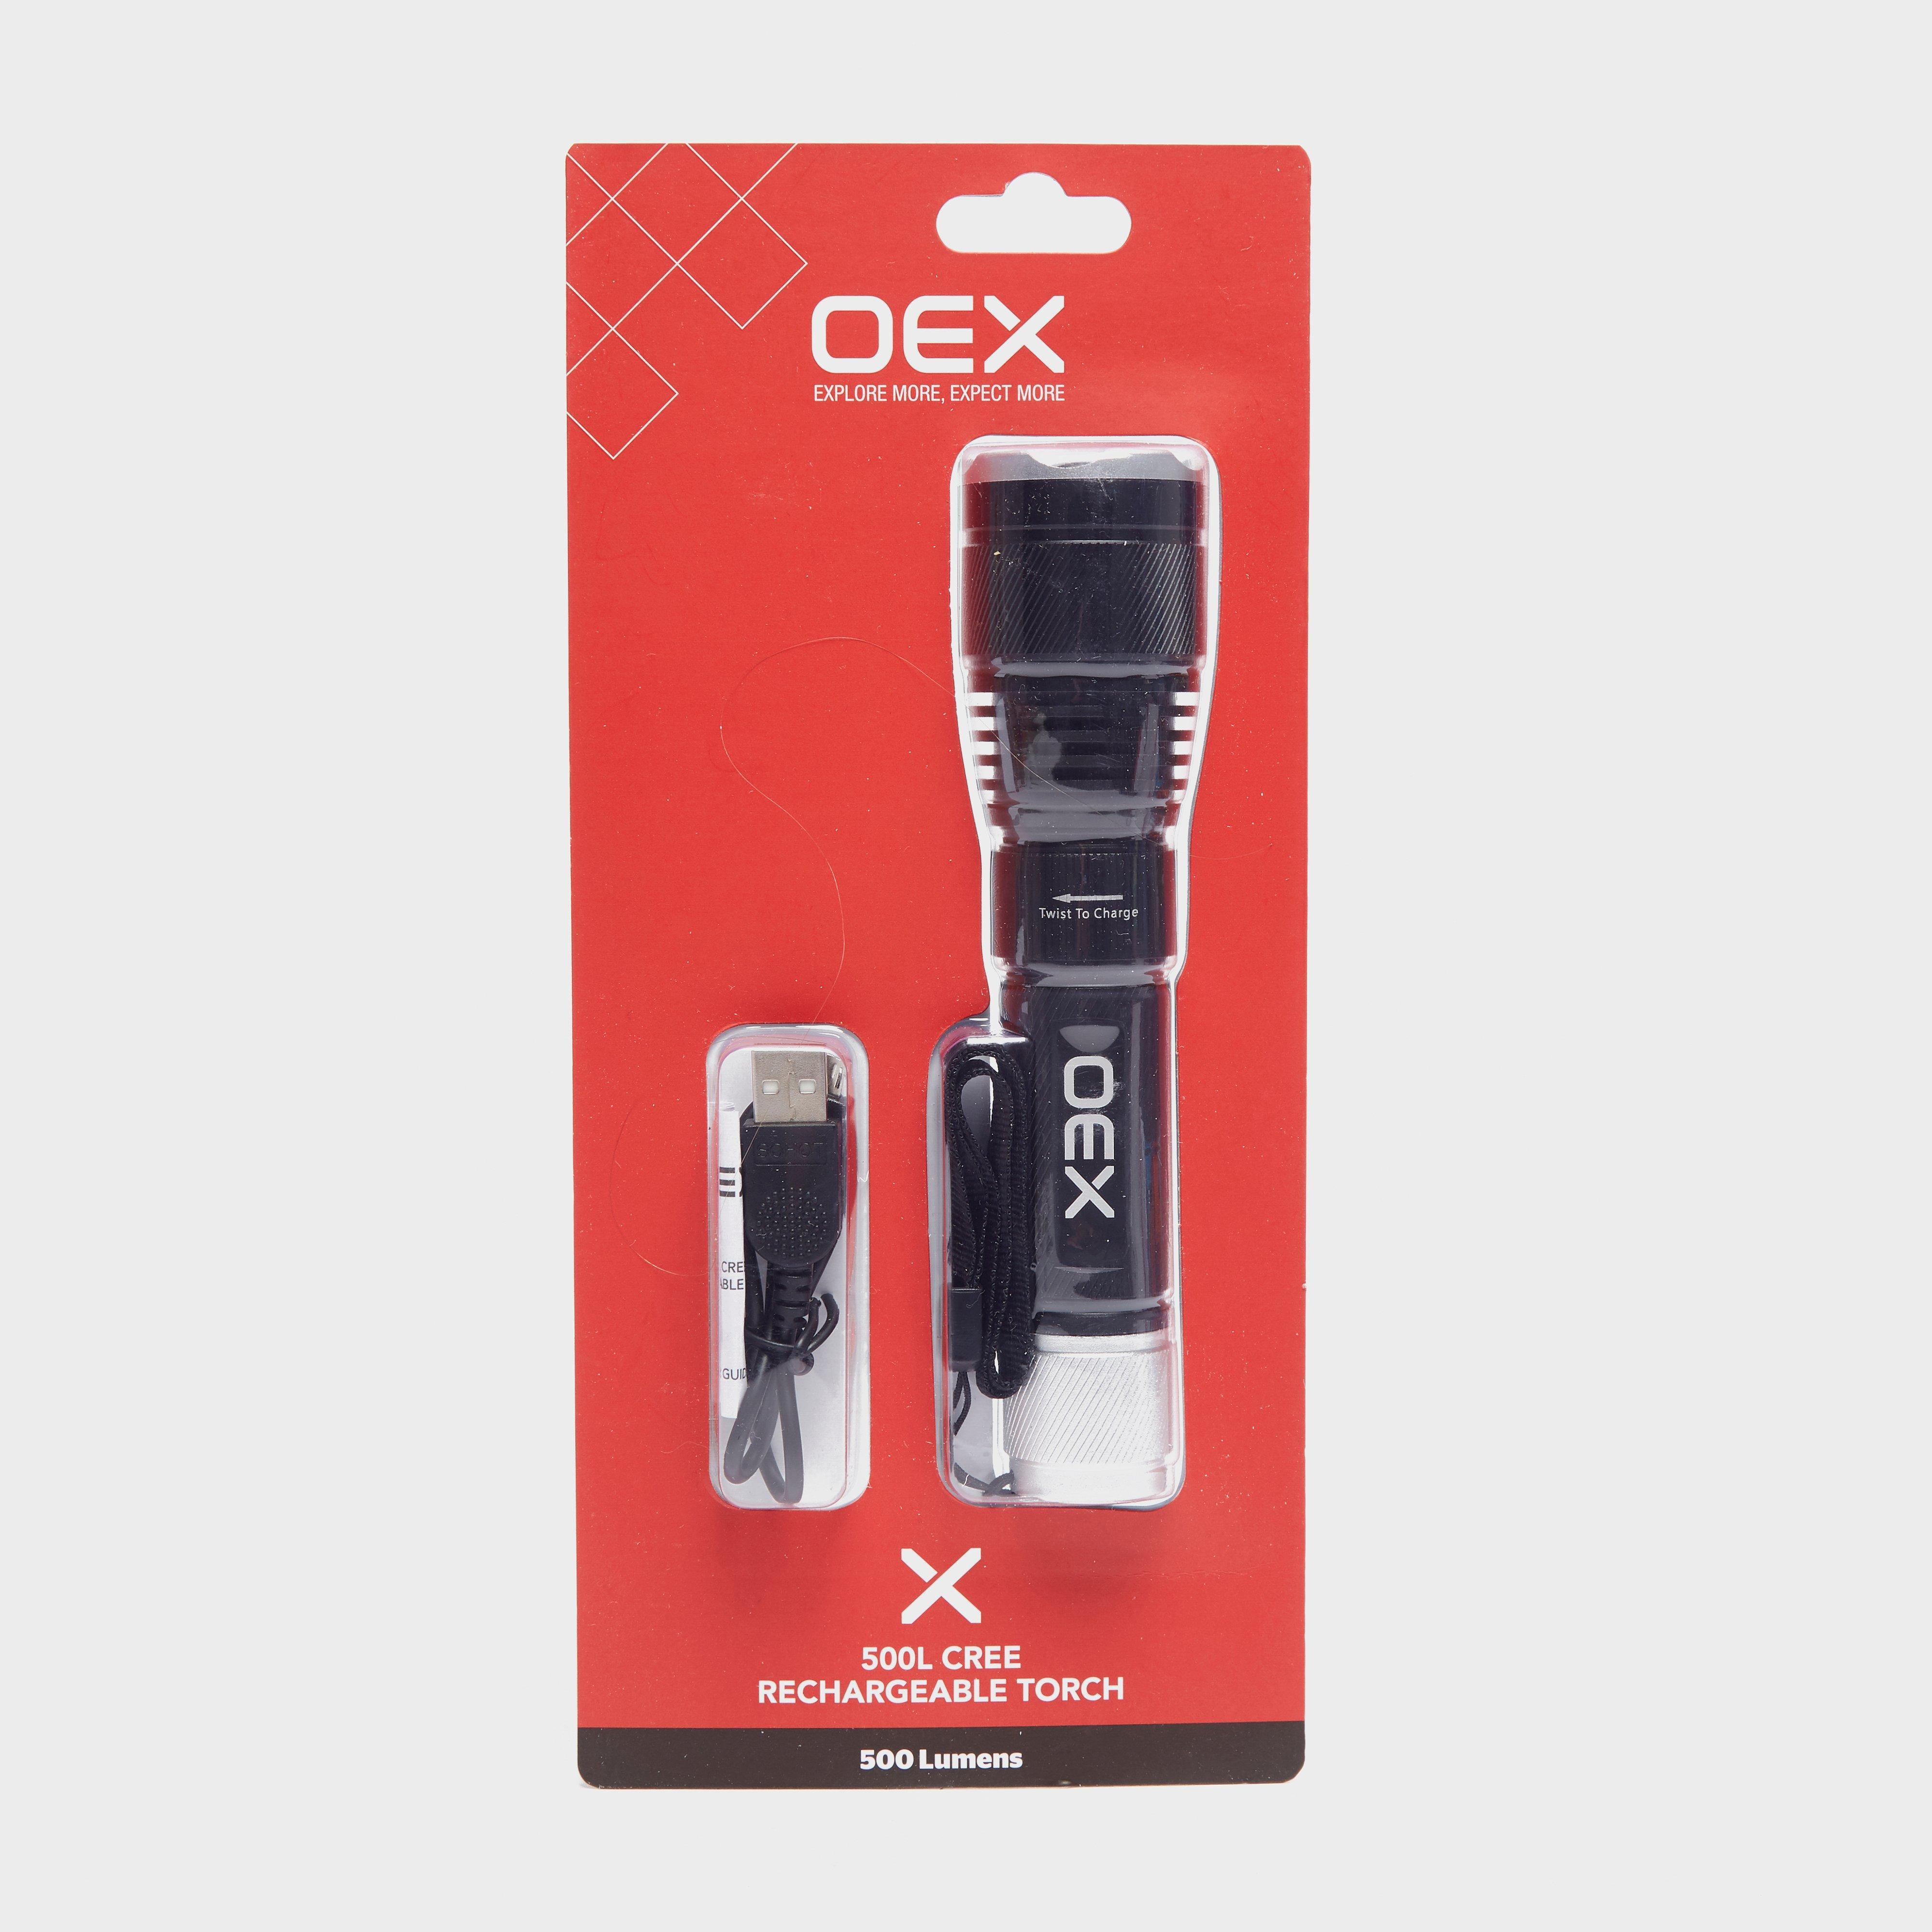 Image of Oex Rechargeable Cree Torch - Blk/Blk, BLK/BLK